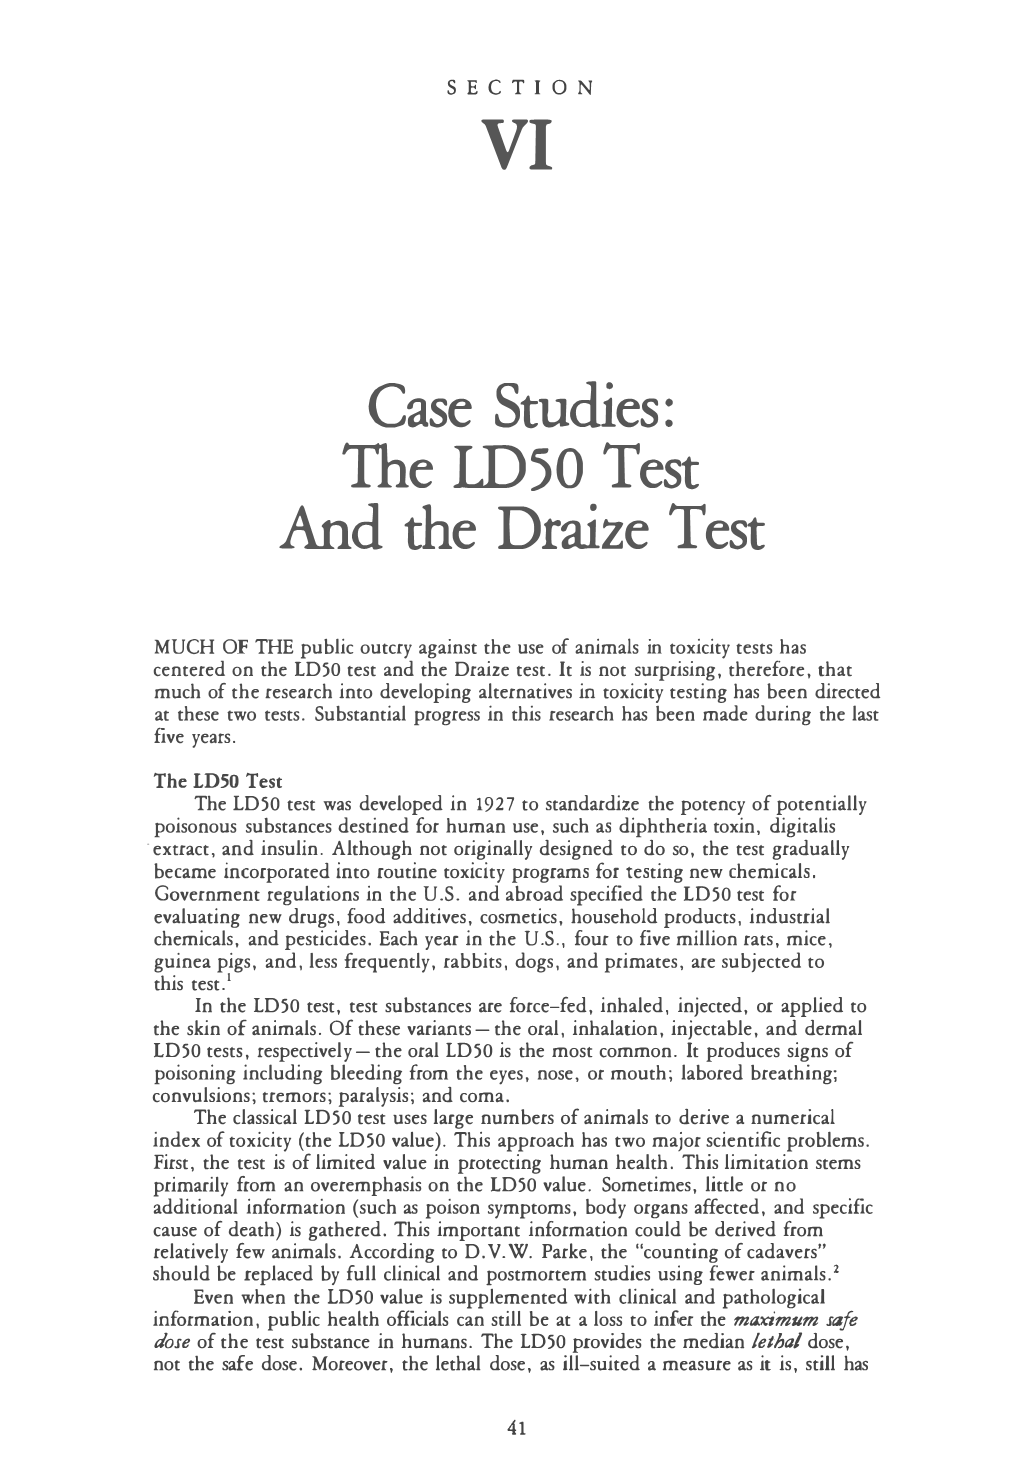 The LD50 Test and the Draize Test